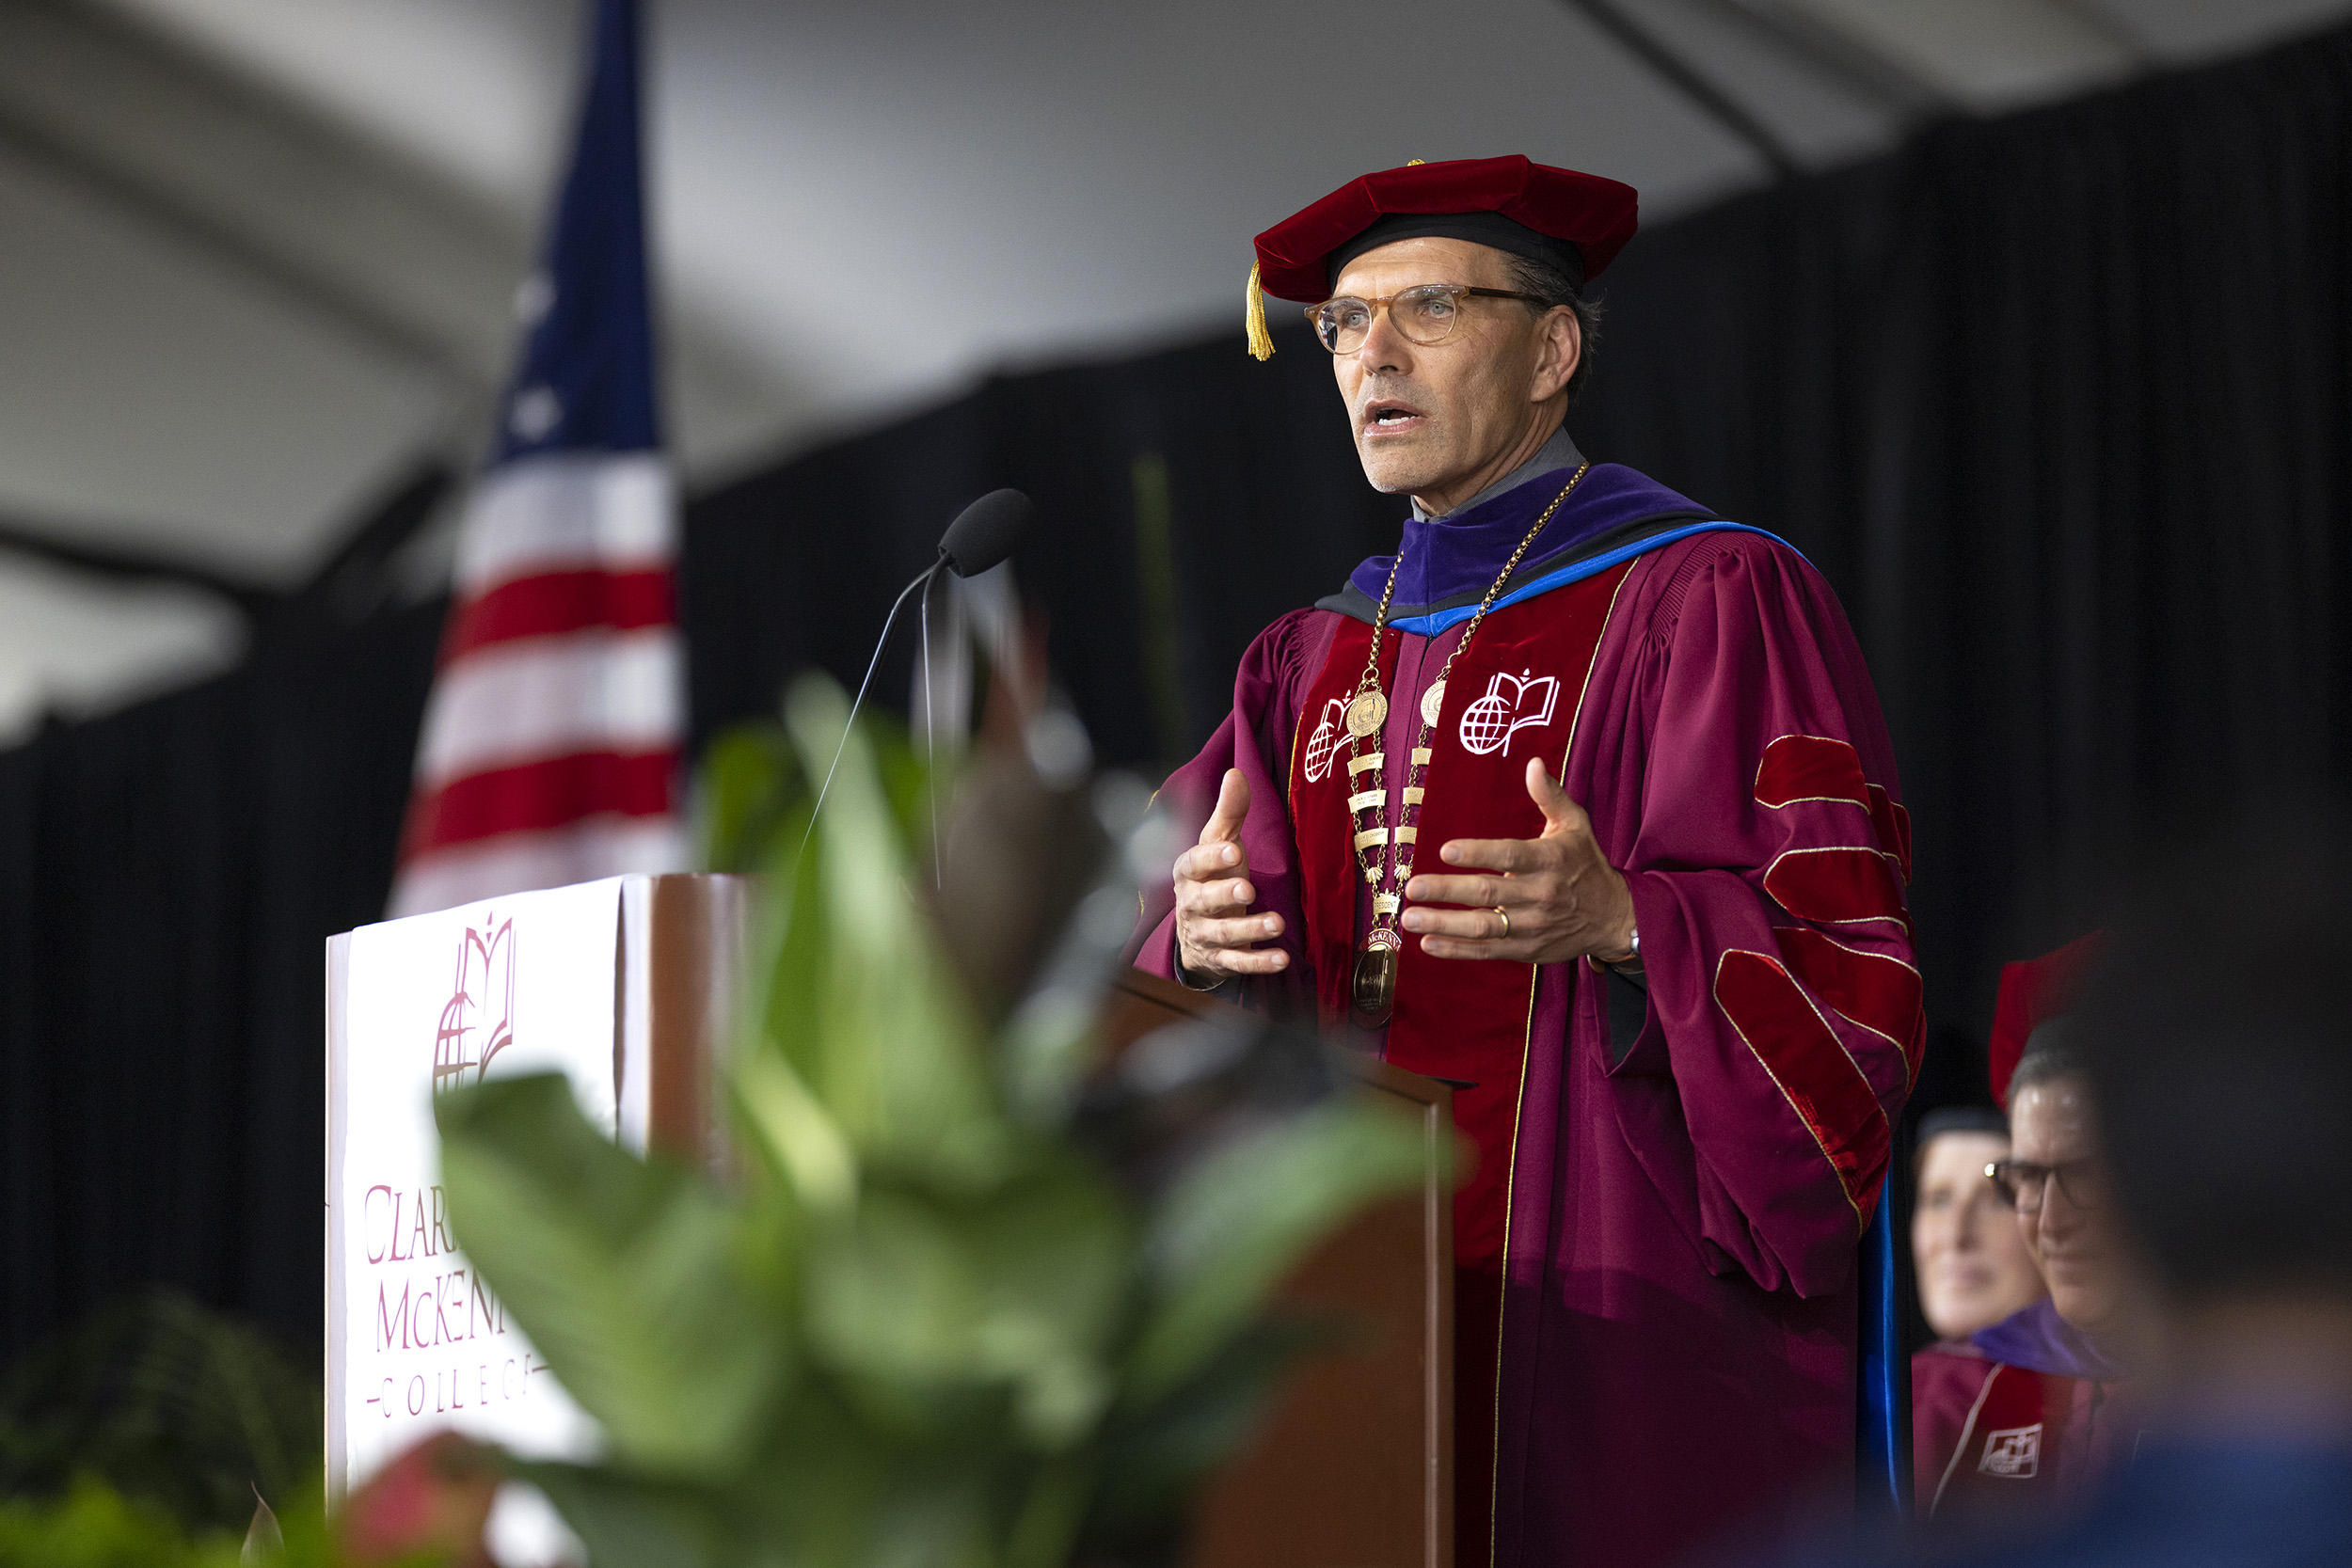 President Chodosh delivers his keynote address at 2020 and 2021's Commencement.